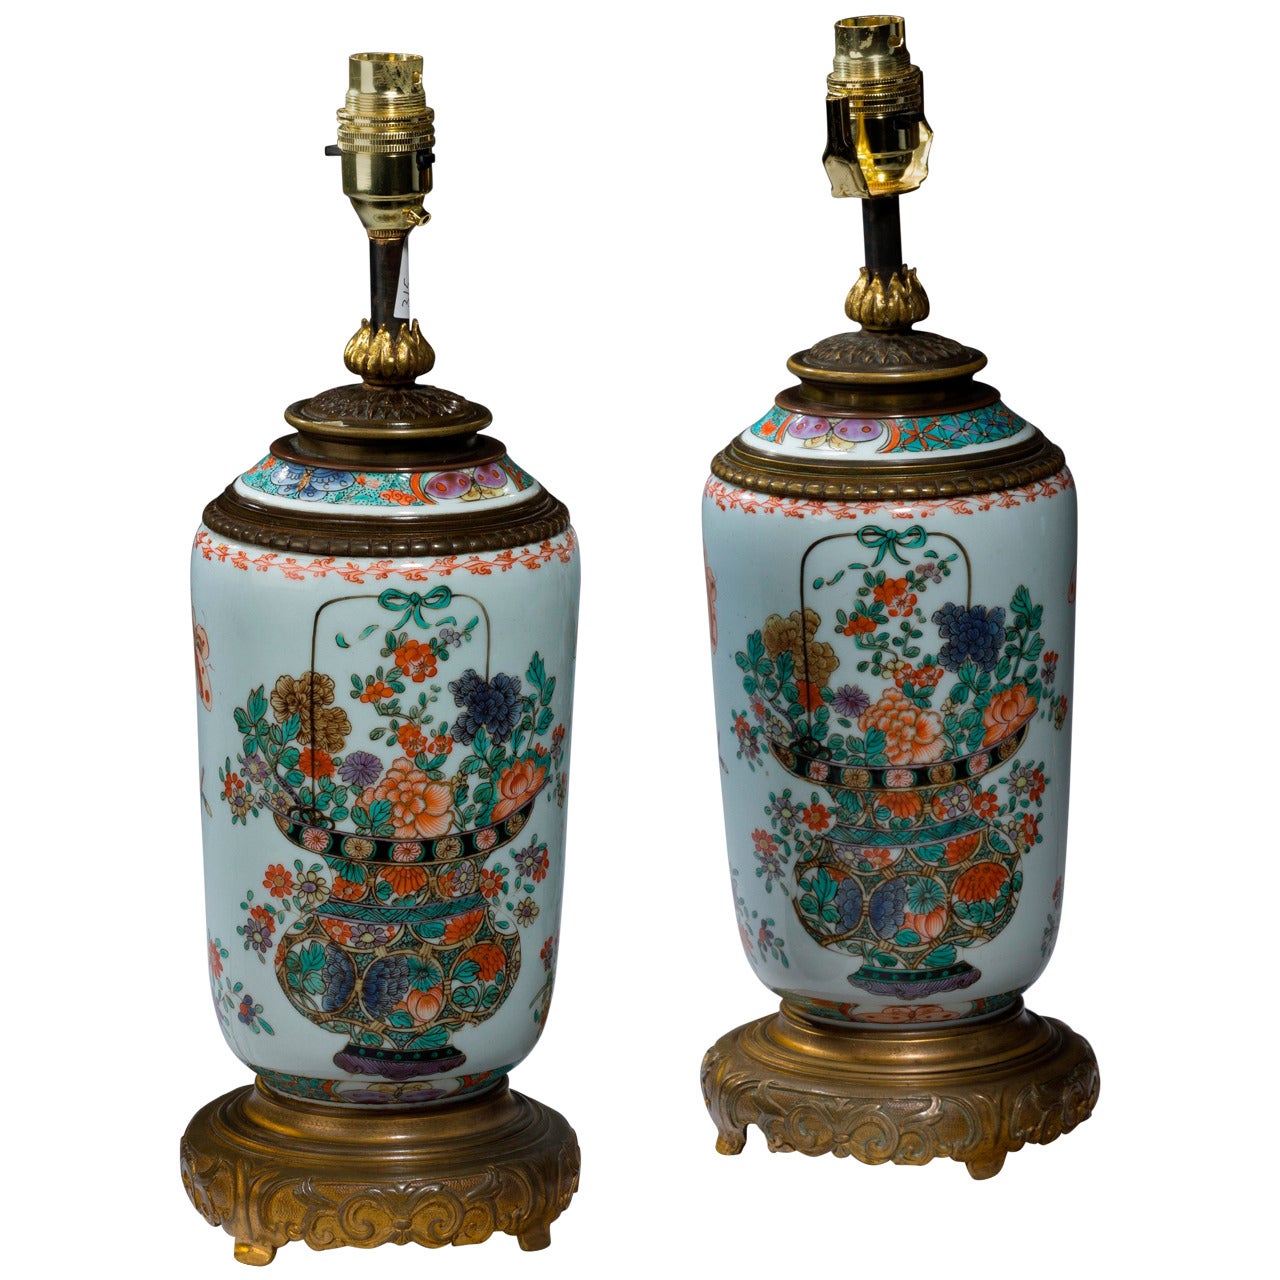 Pair of late 19th century Cantonese Porcelain Vases Lamps